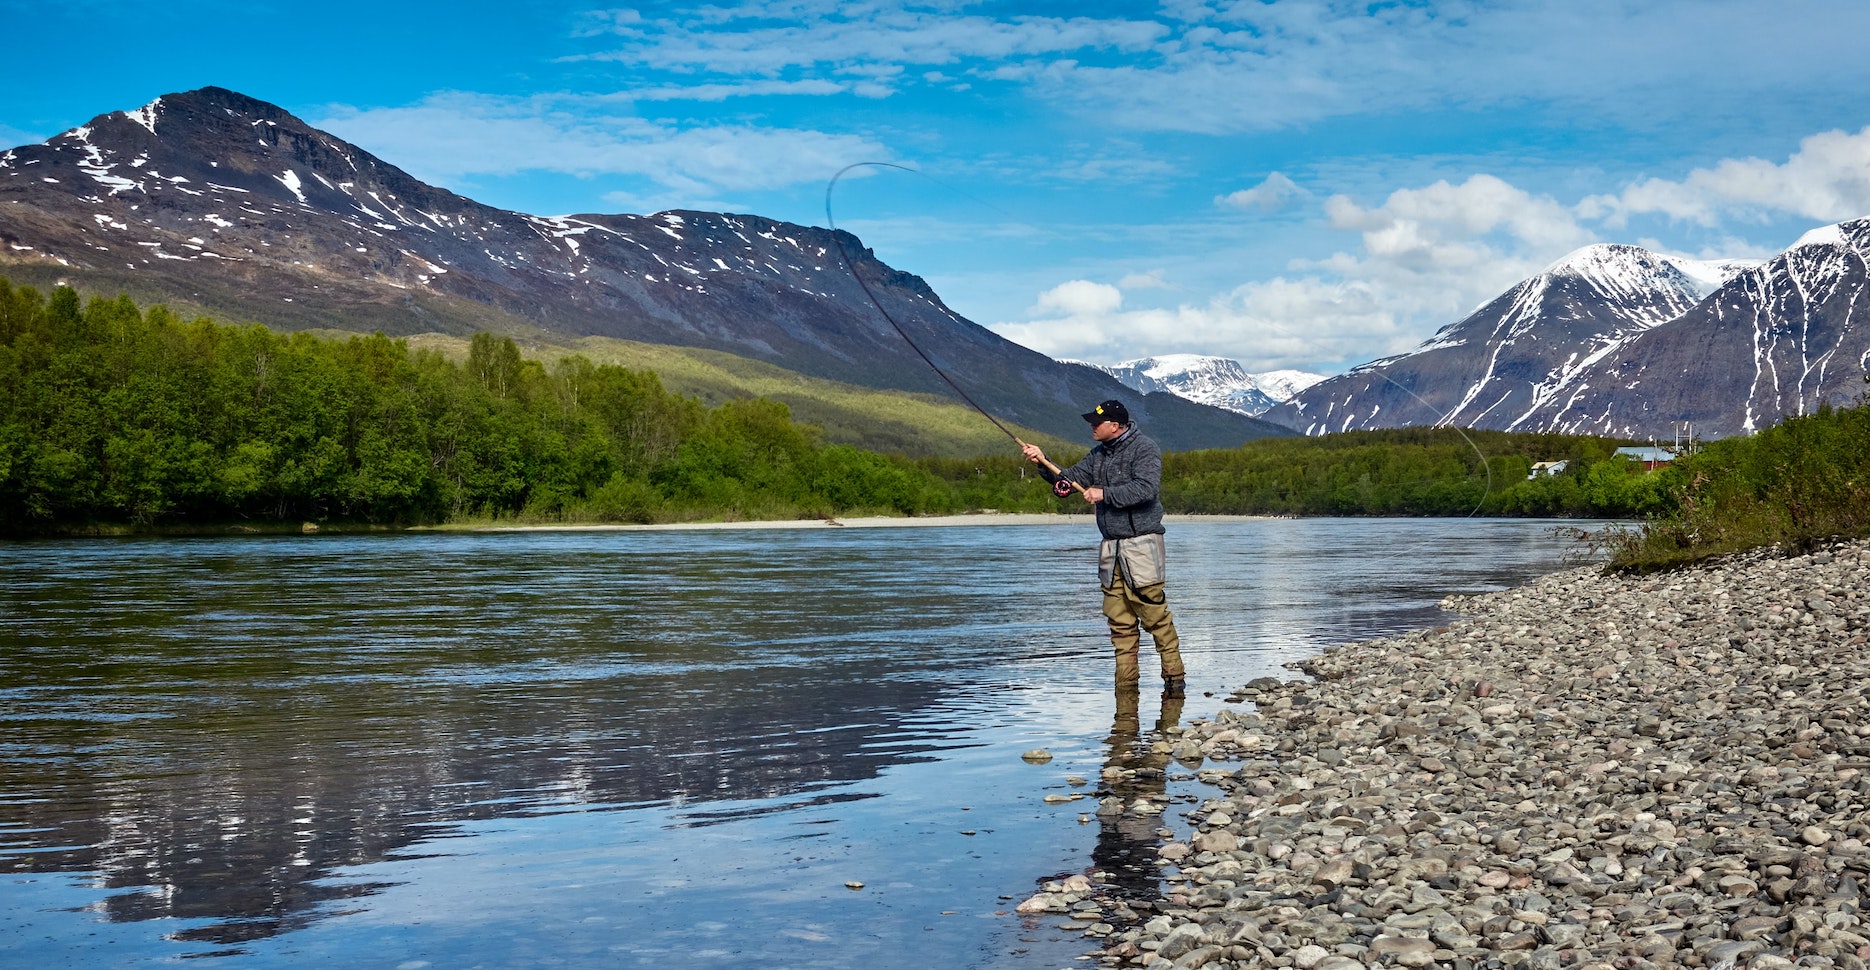 An image of a man fishing in a pond in front of the mountains